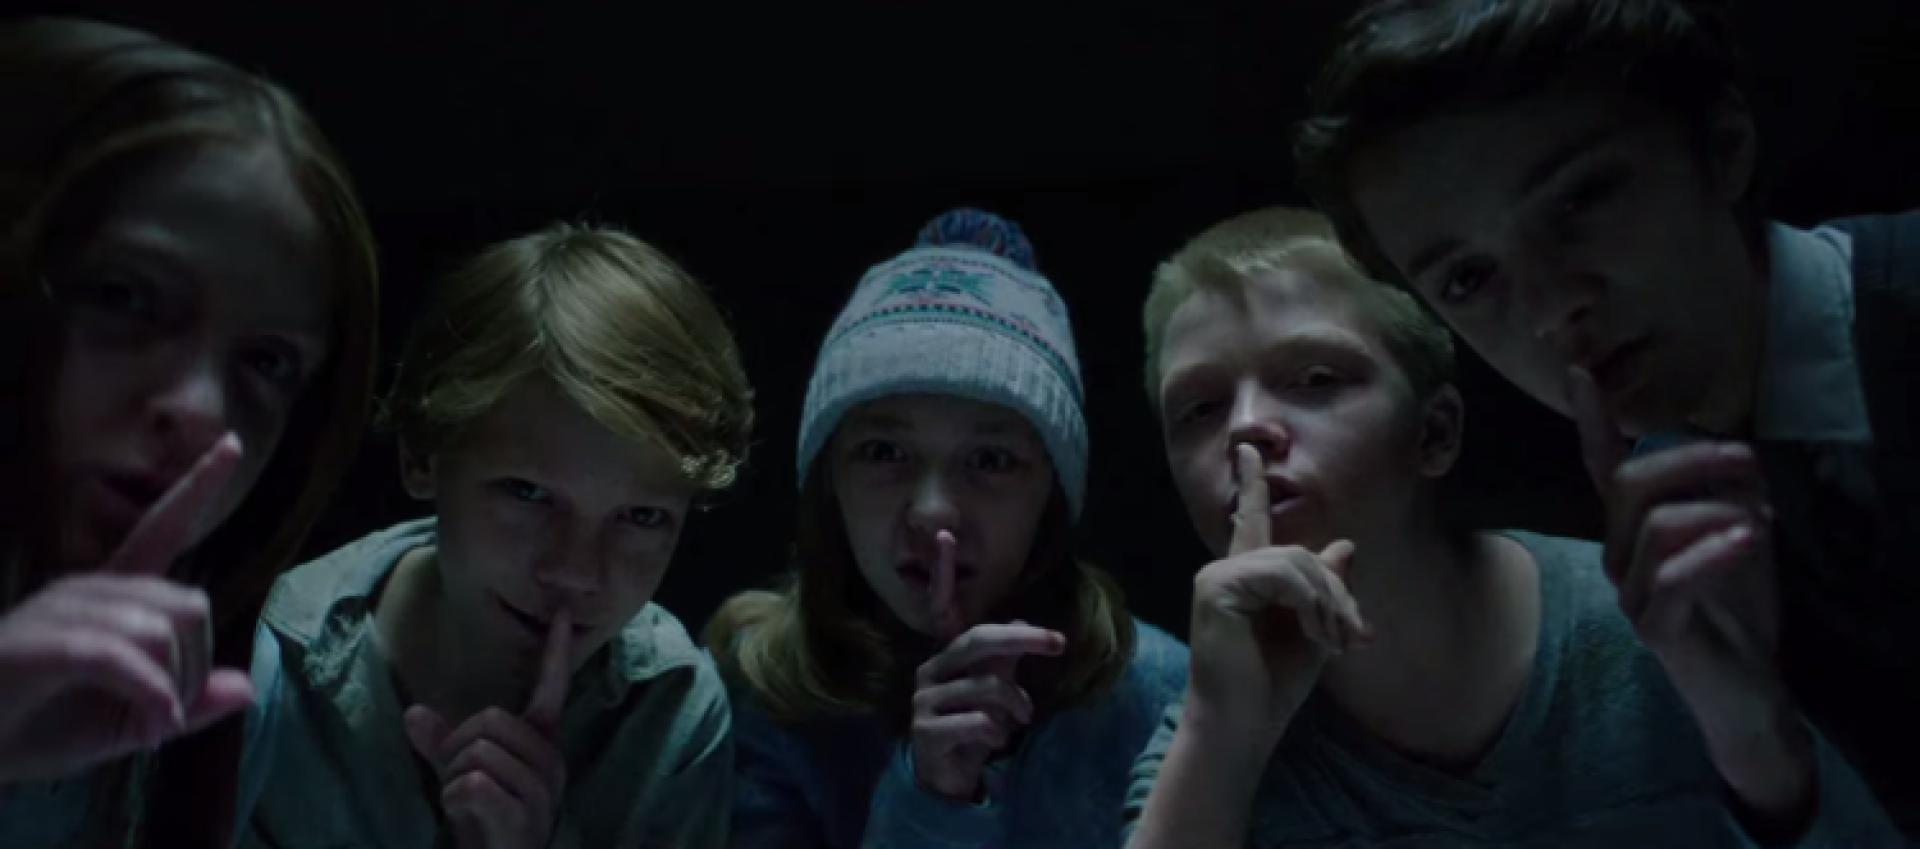 Box Office: Sinister 2